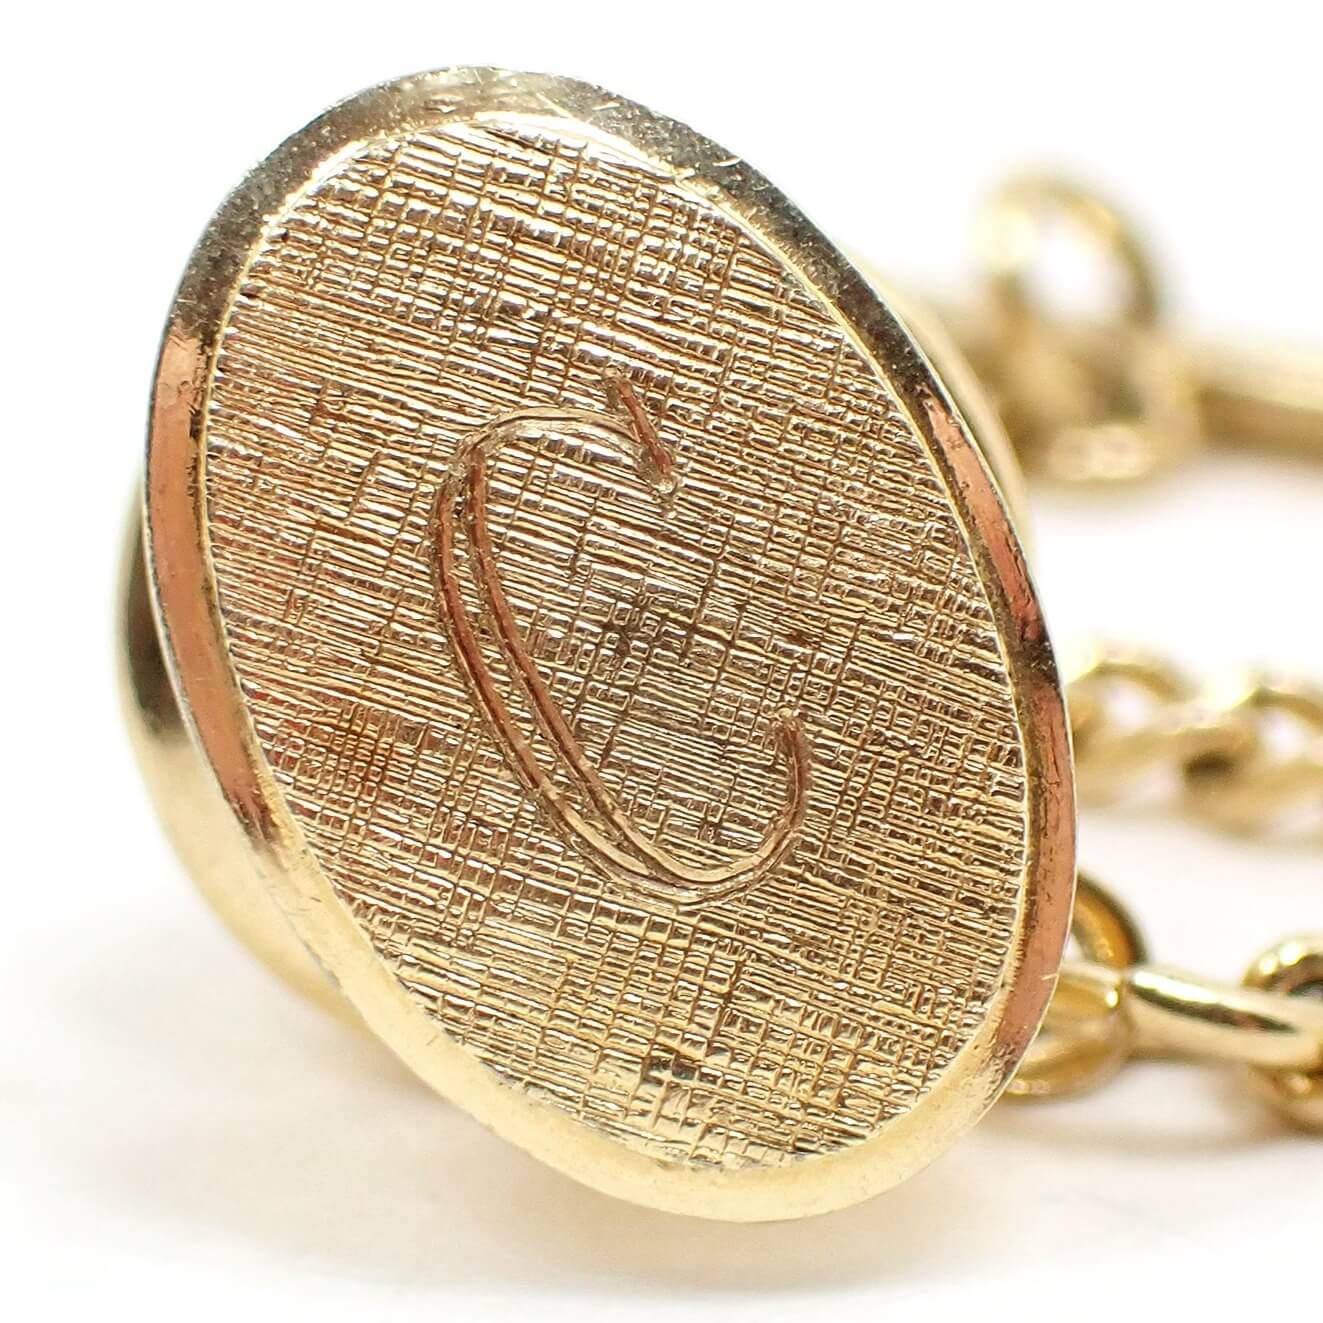 Enlarged front view of the Mid Century vintage initial tie tack. It is oval and has a brushed matte gold tone appearance. There is a block style letter C engraved on the front.